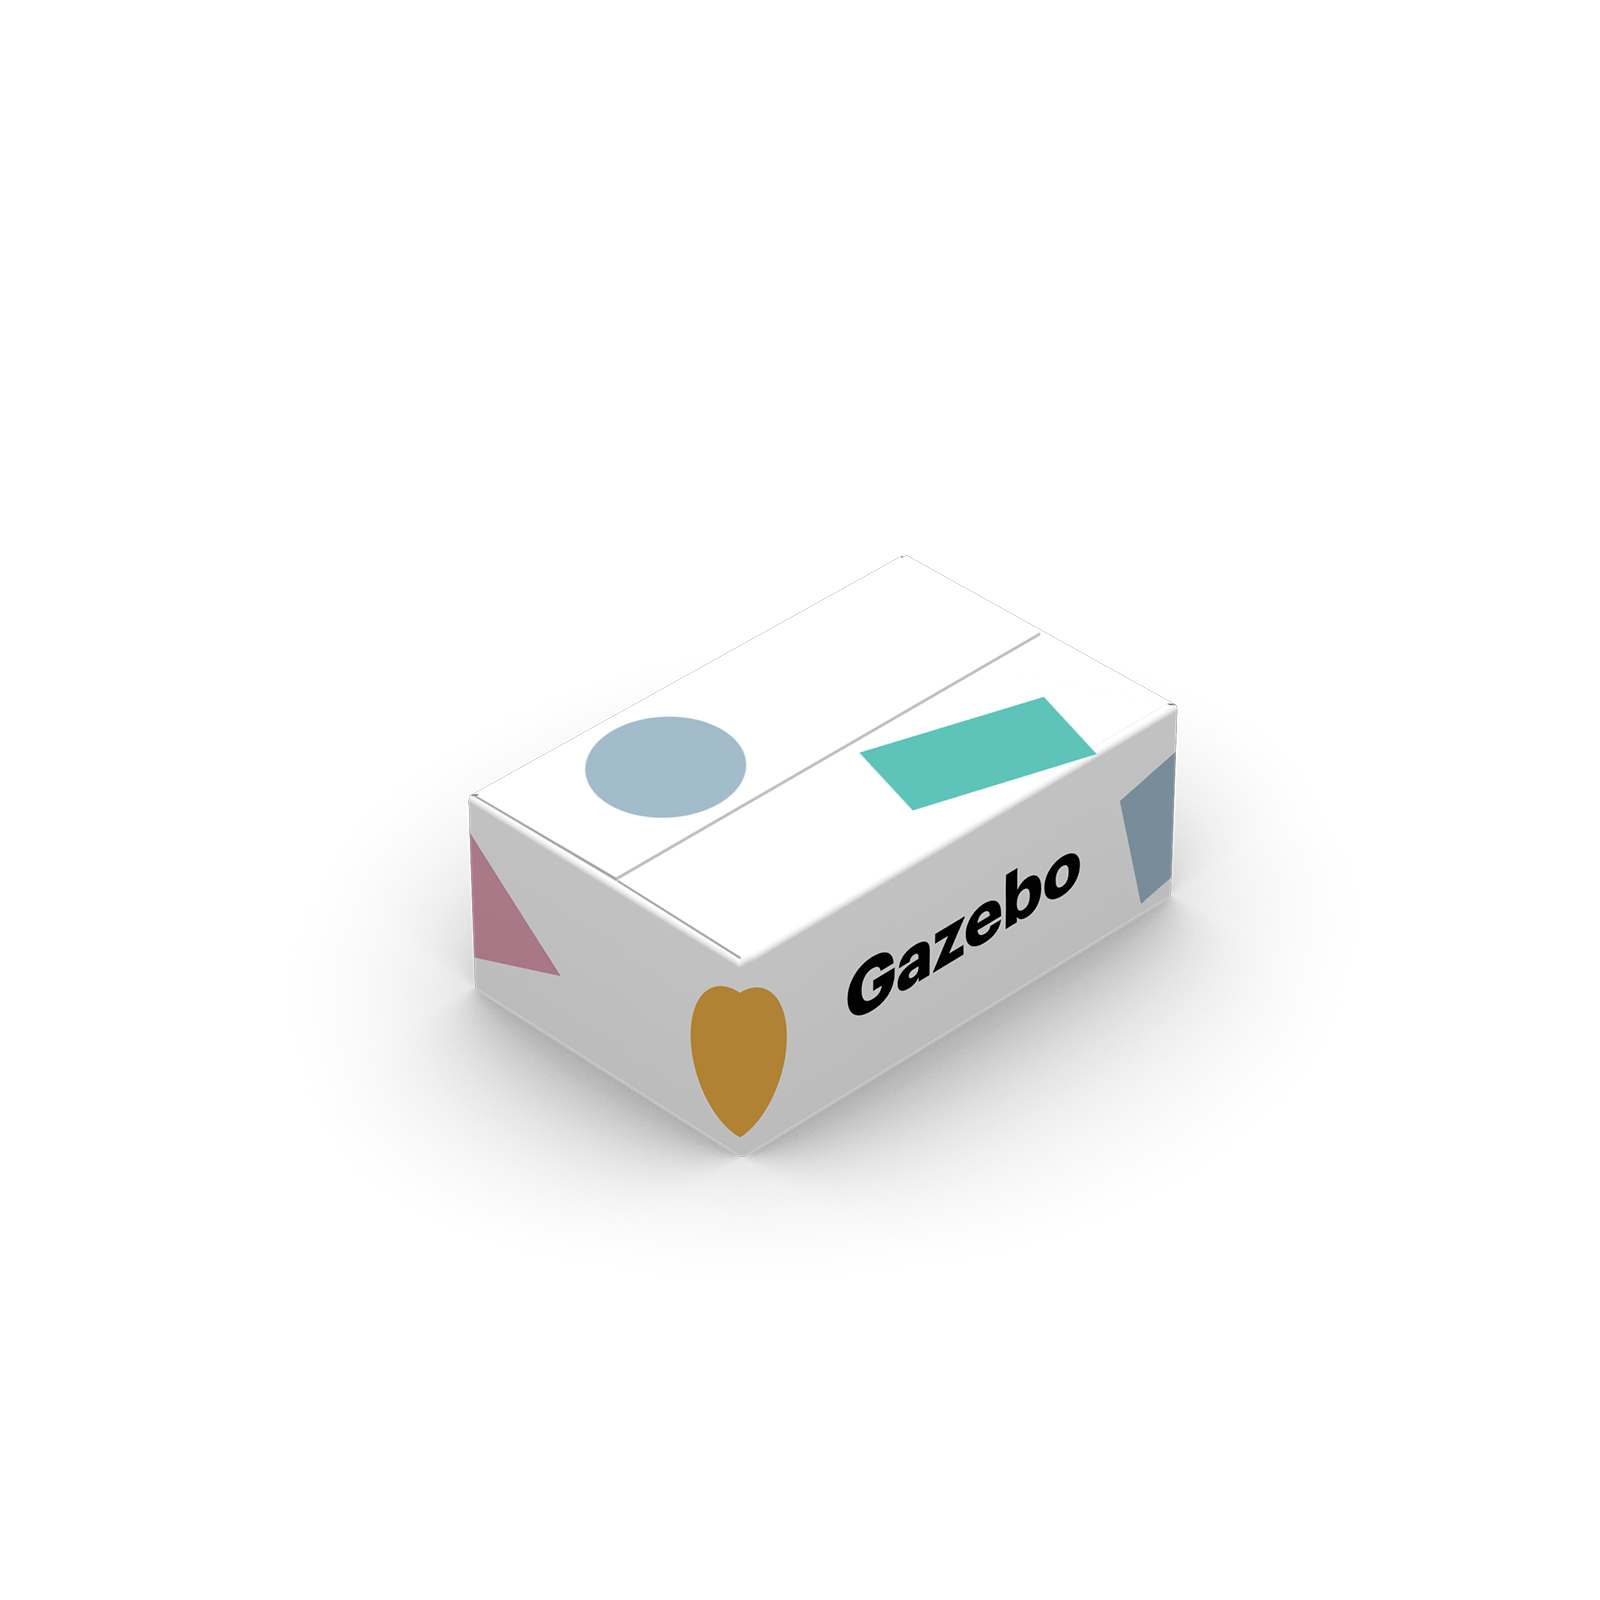 Box Transparent Logo - Design Your Own Custom Boxes and Packaging | Packlane